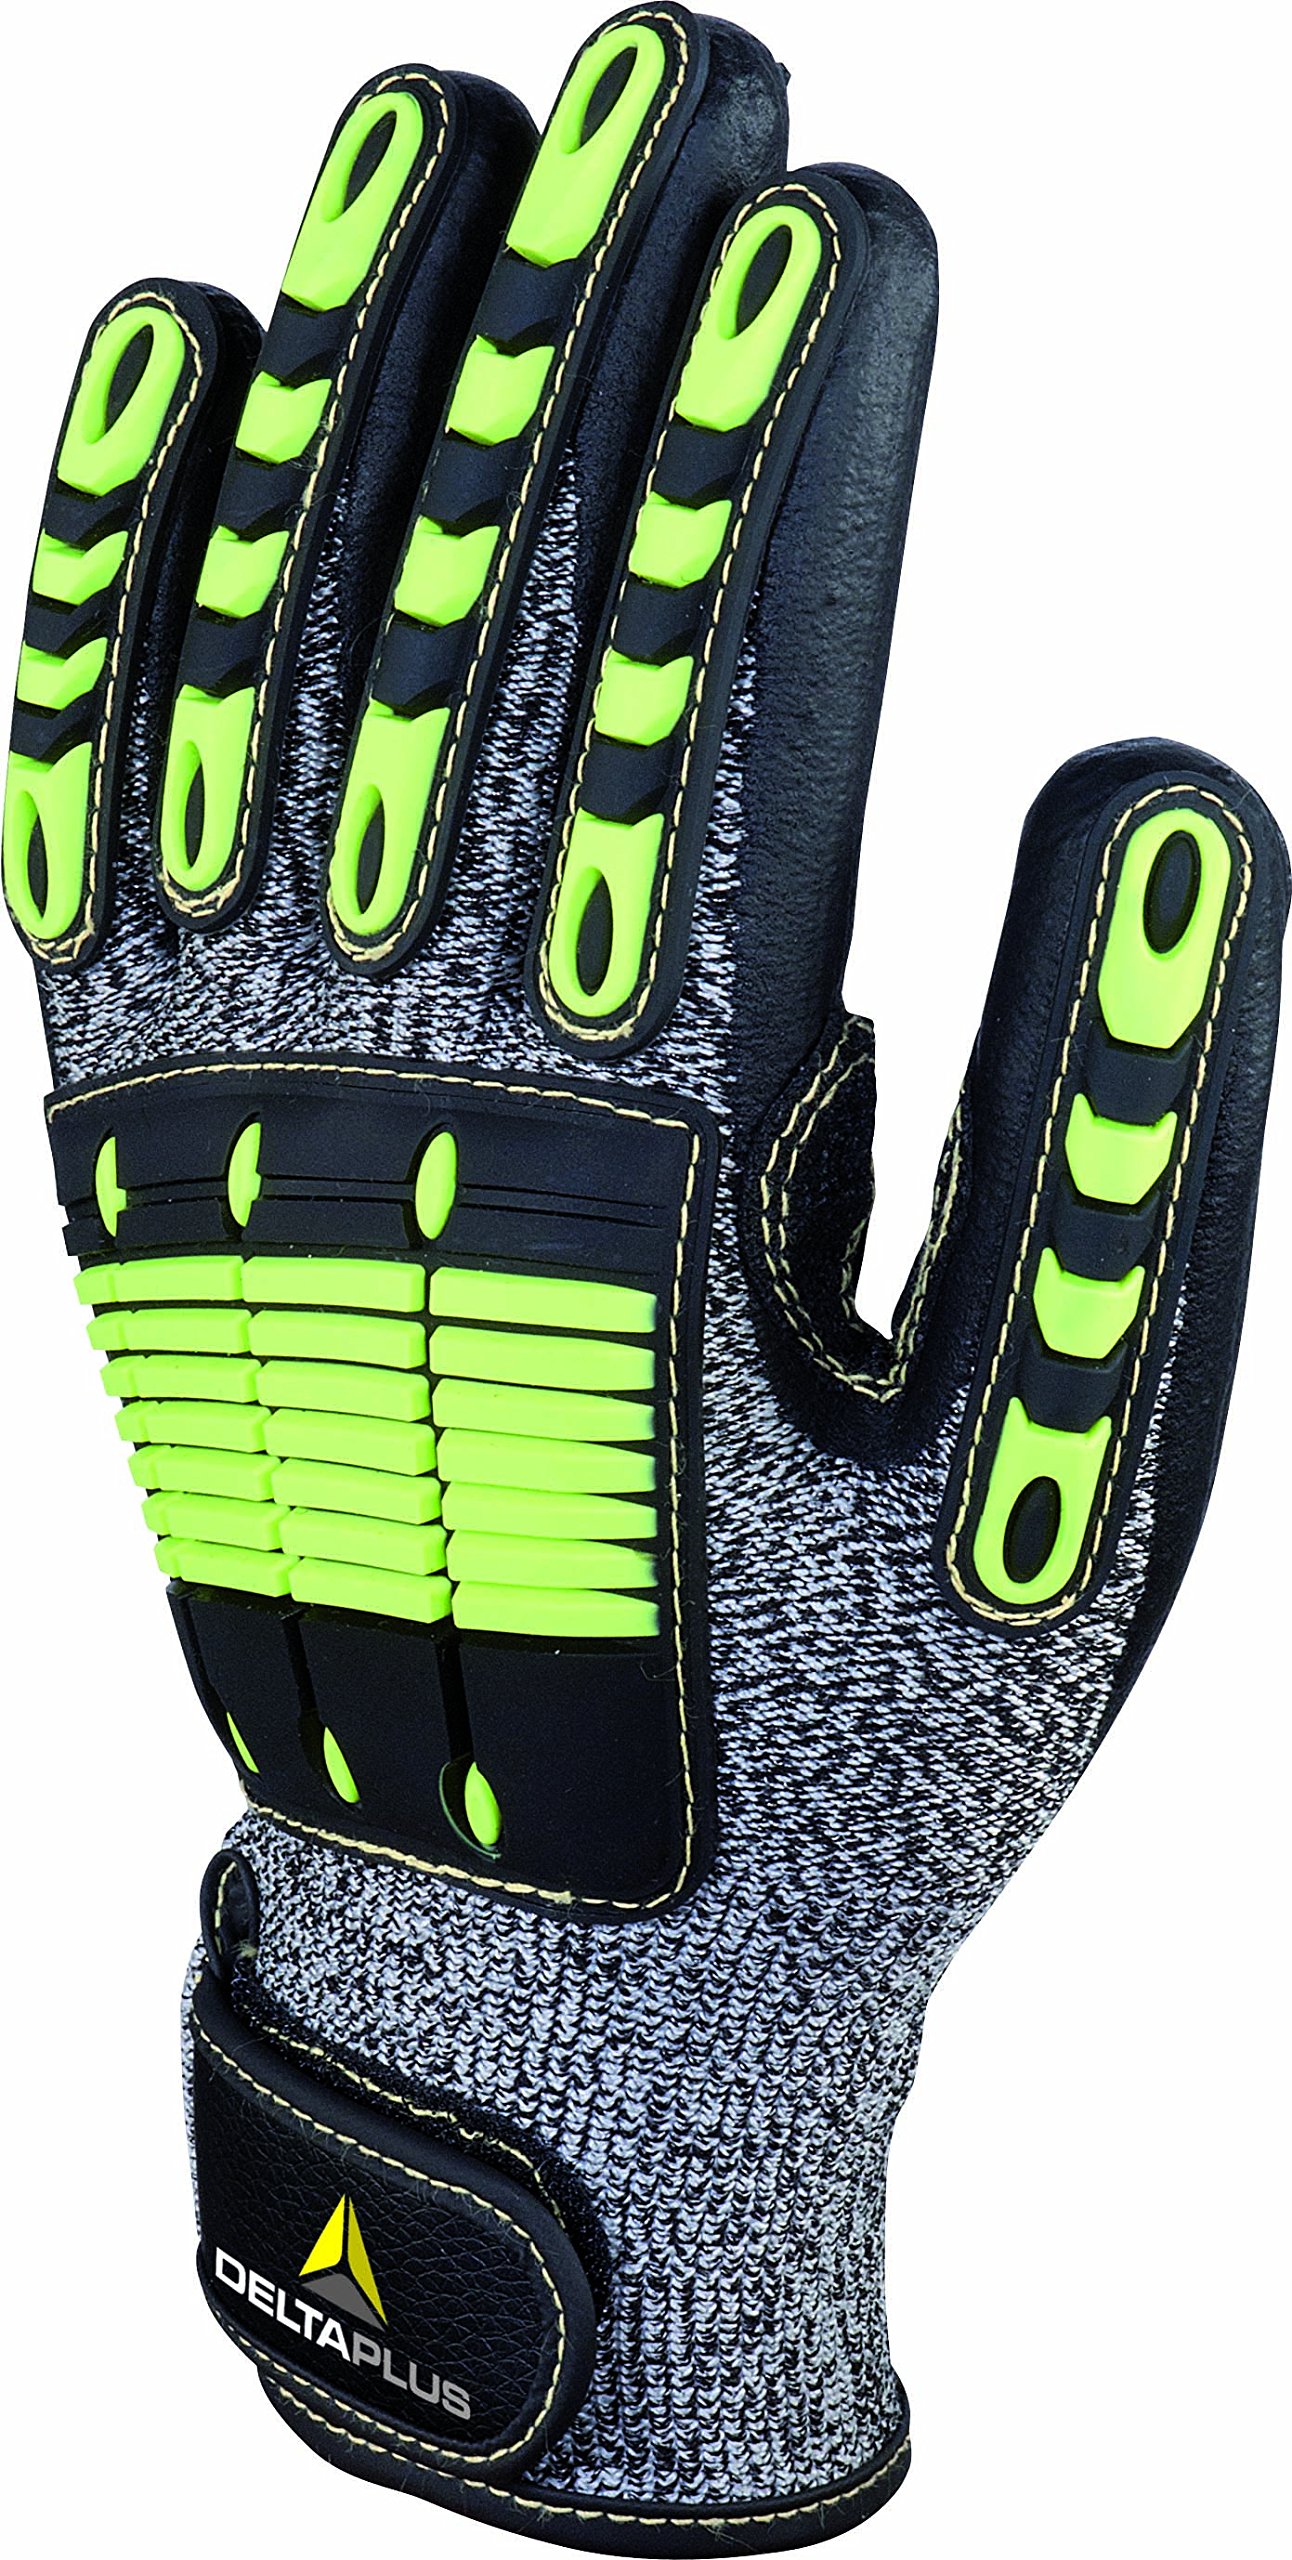 Impact and Cut Resistance Glove XL